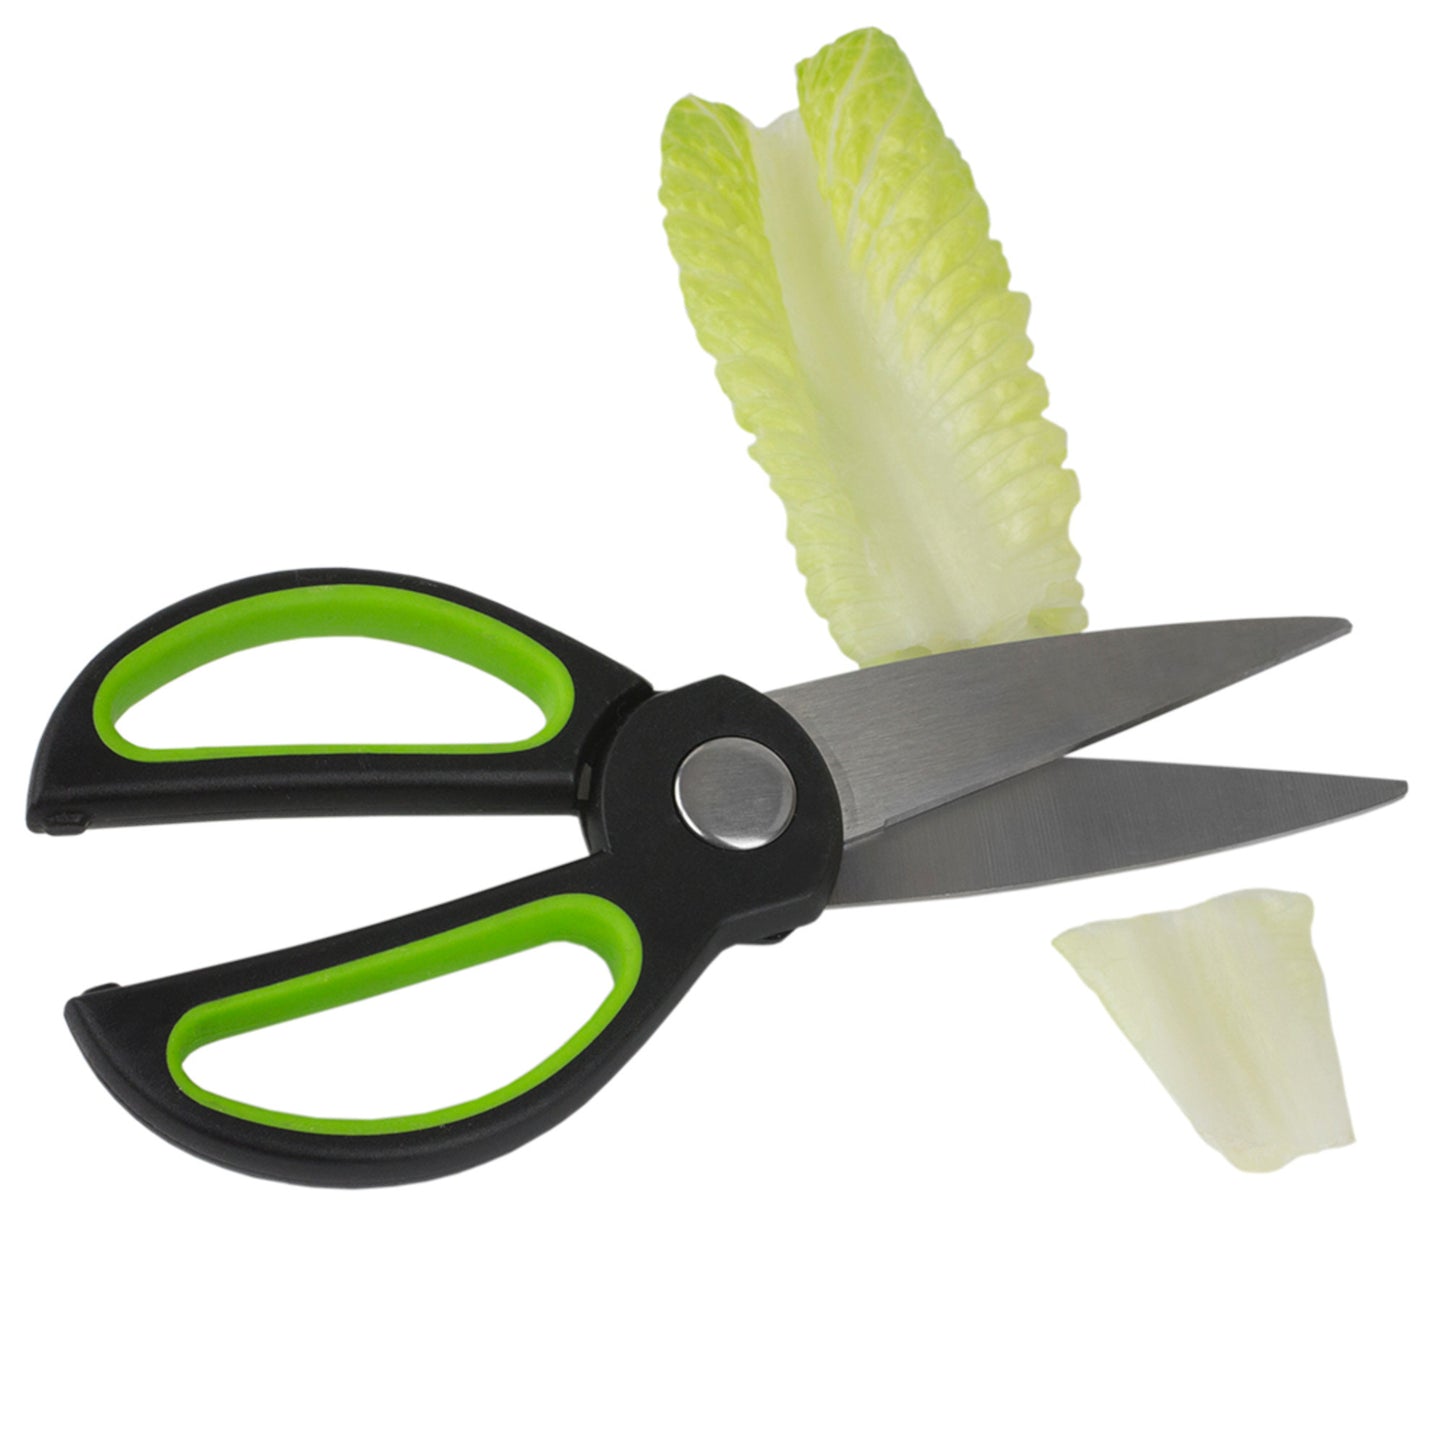 Home Basics Kitchen Shears with Silicone Grip Handles - Green